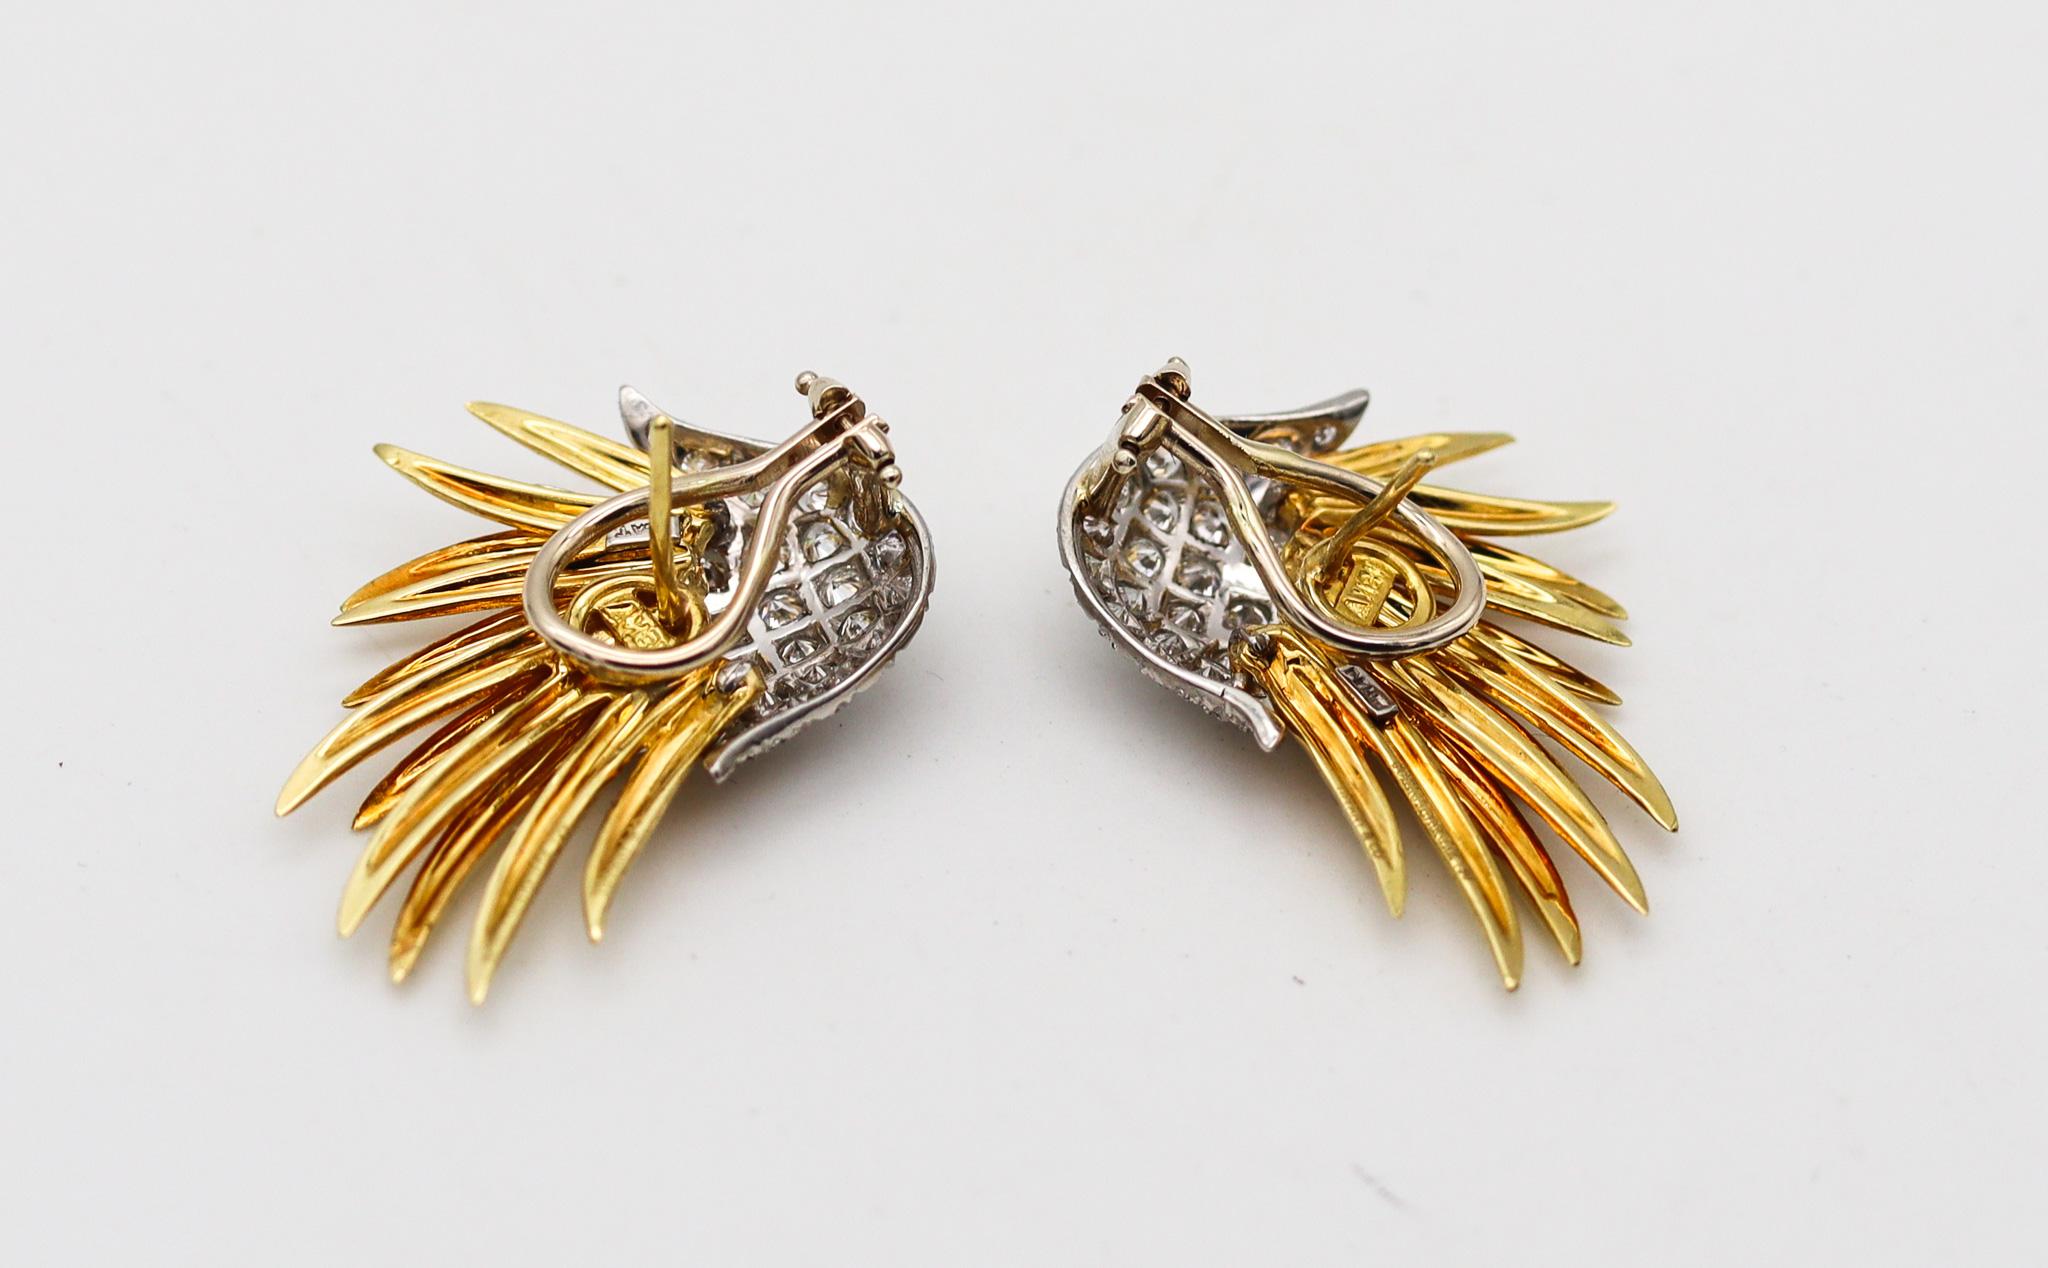 Modernist Tiffany & Co 1970 Flames Earrings In 18Kt Gold & Platinum With 3.46 Ctw Diamonds